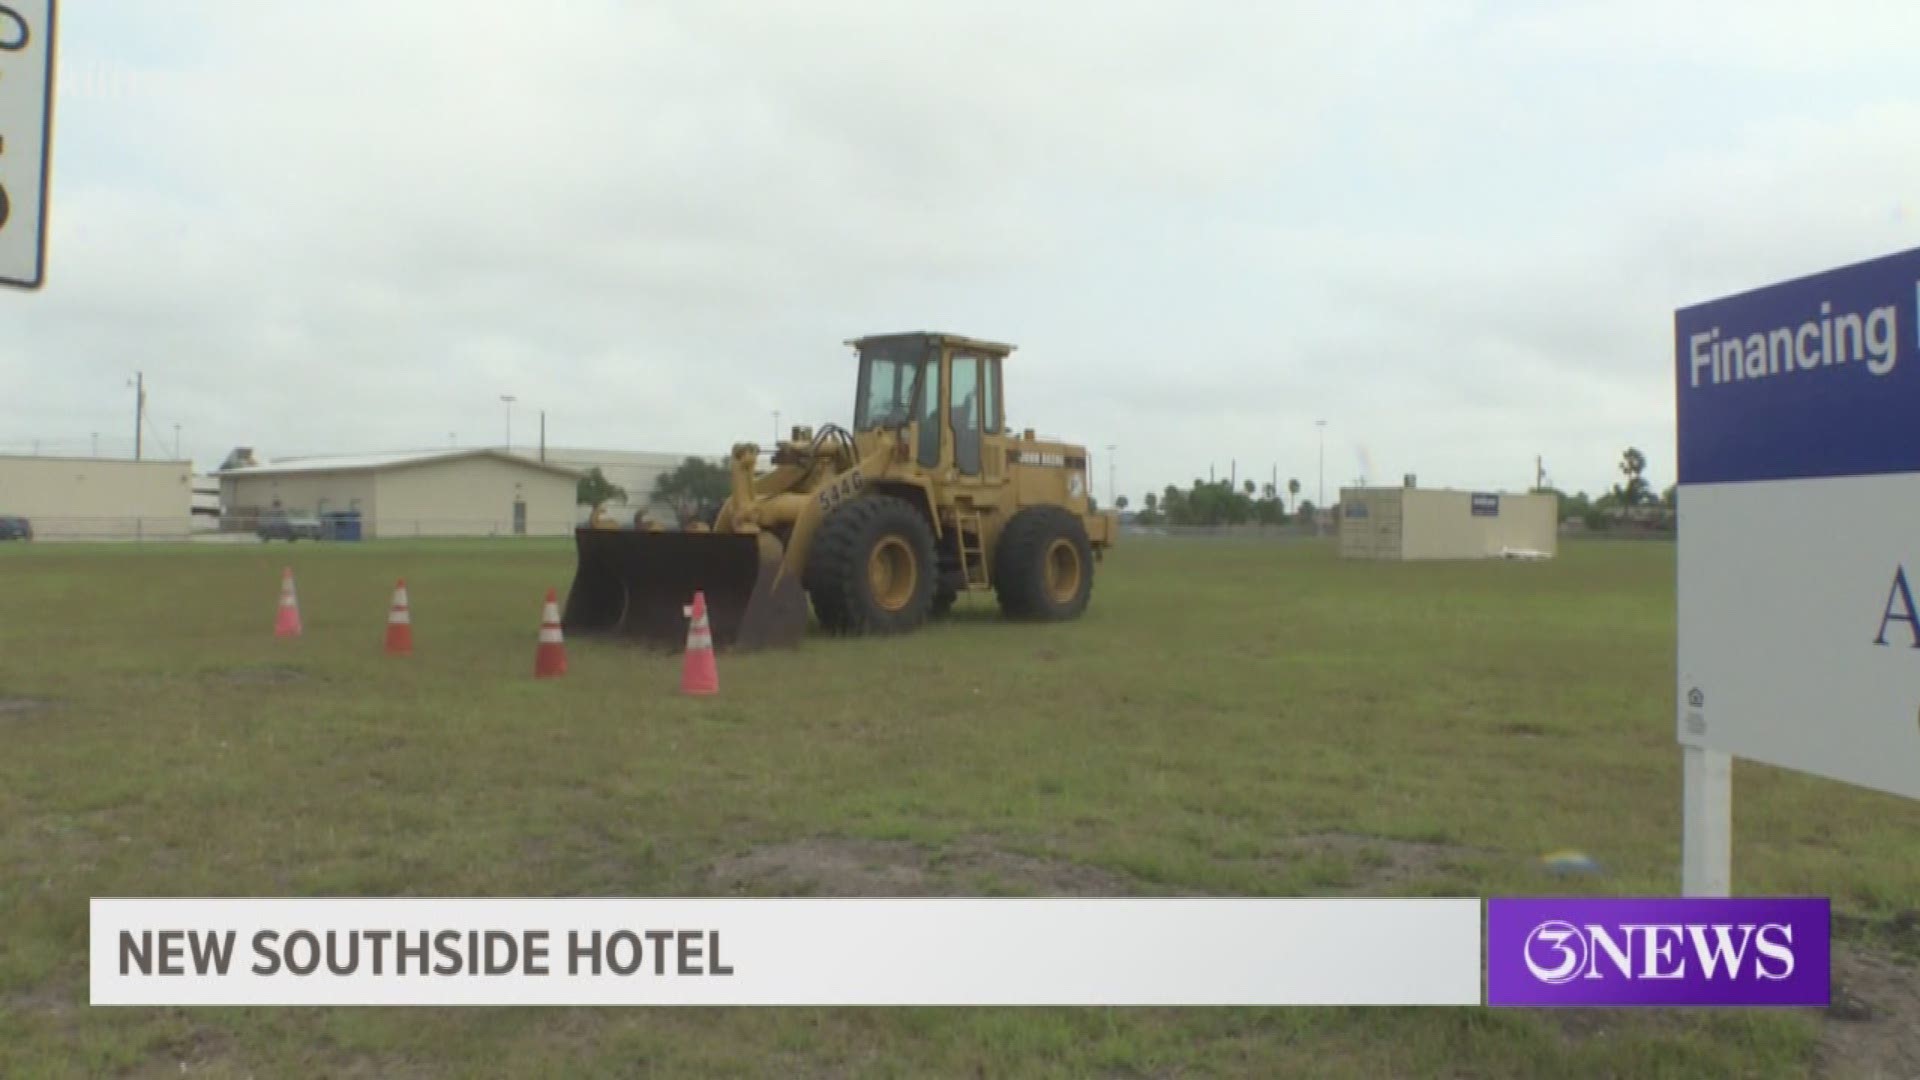 A new 109-room hotel will soon be built in Corpus Christi's southside.